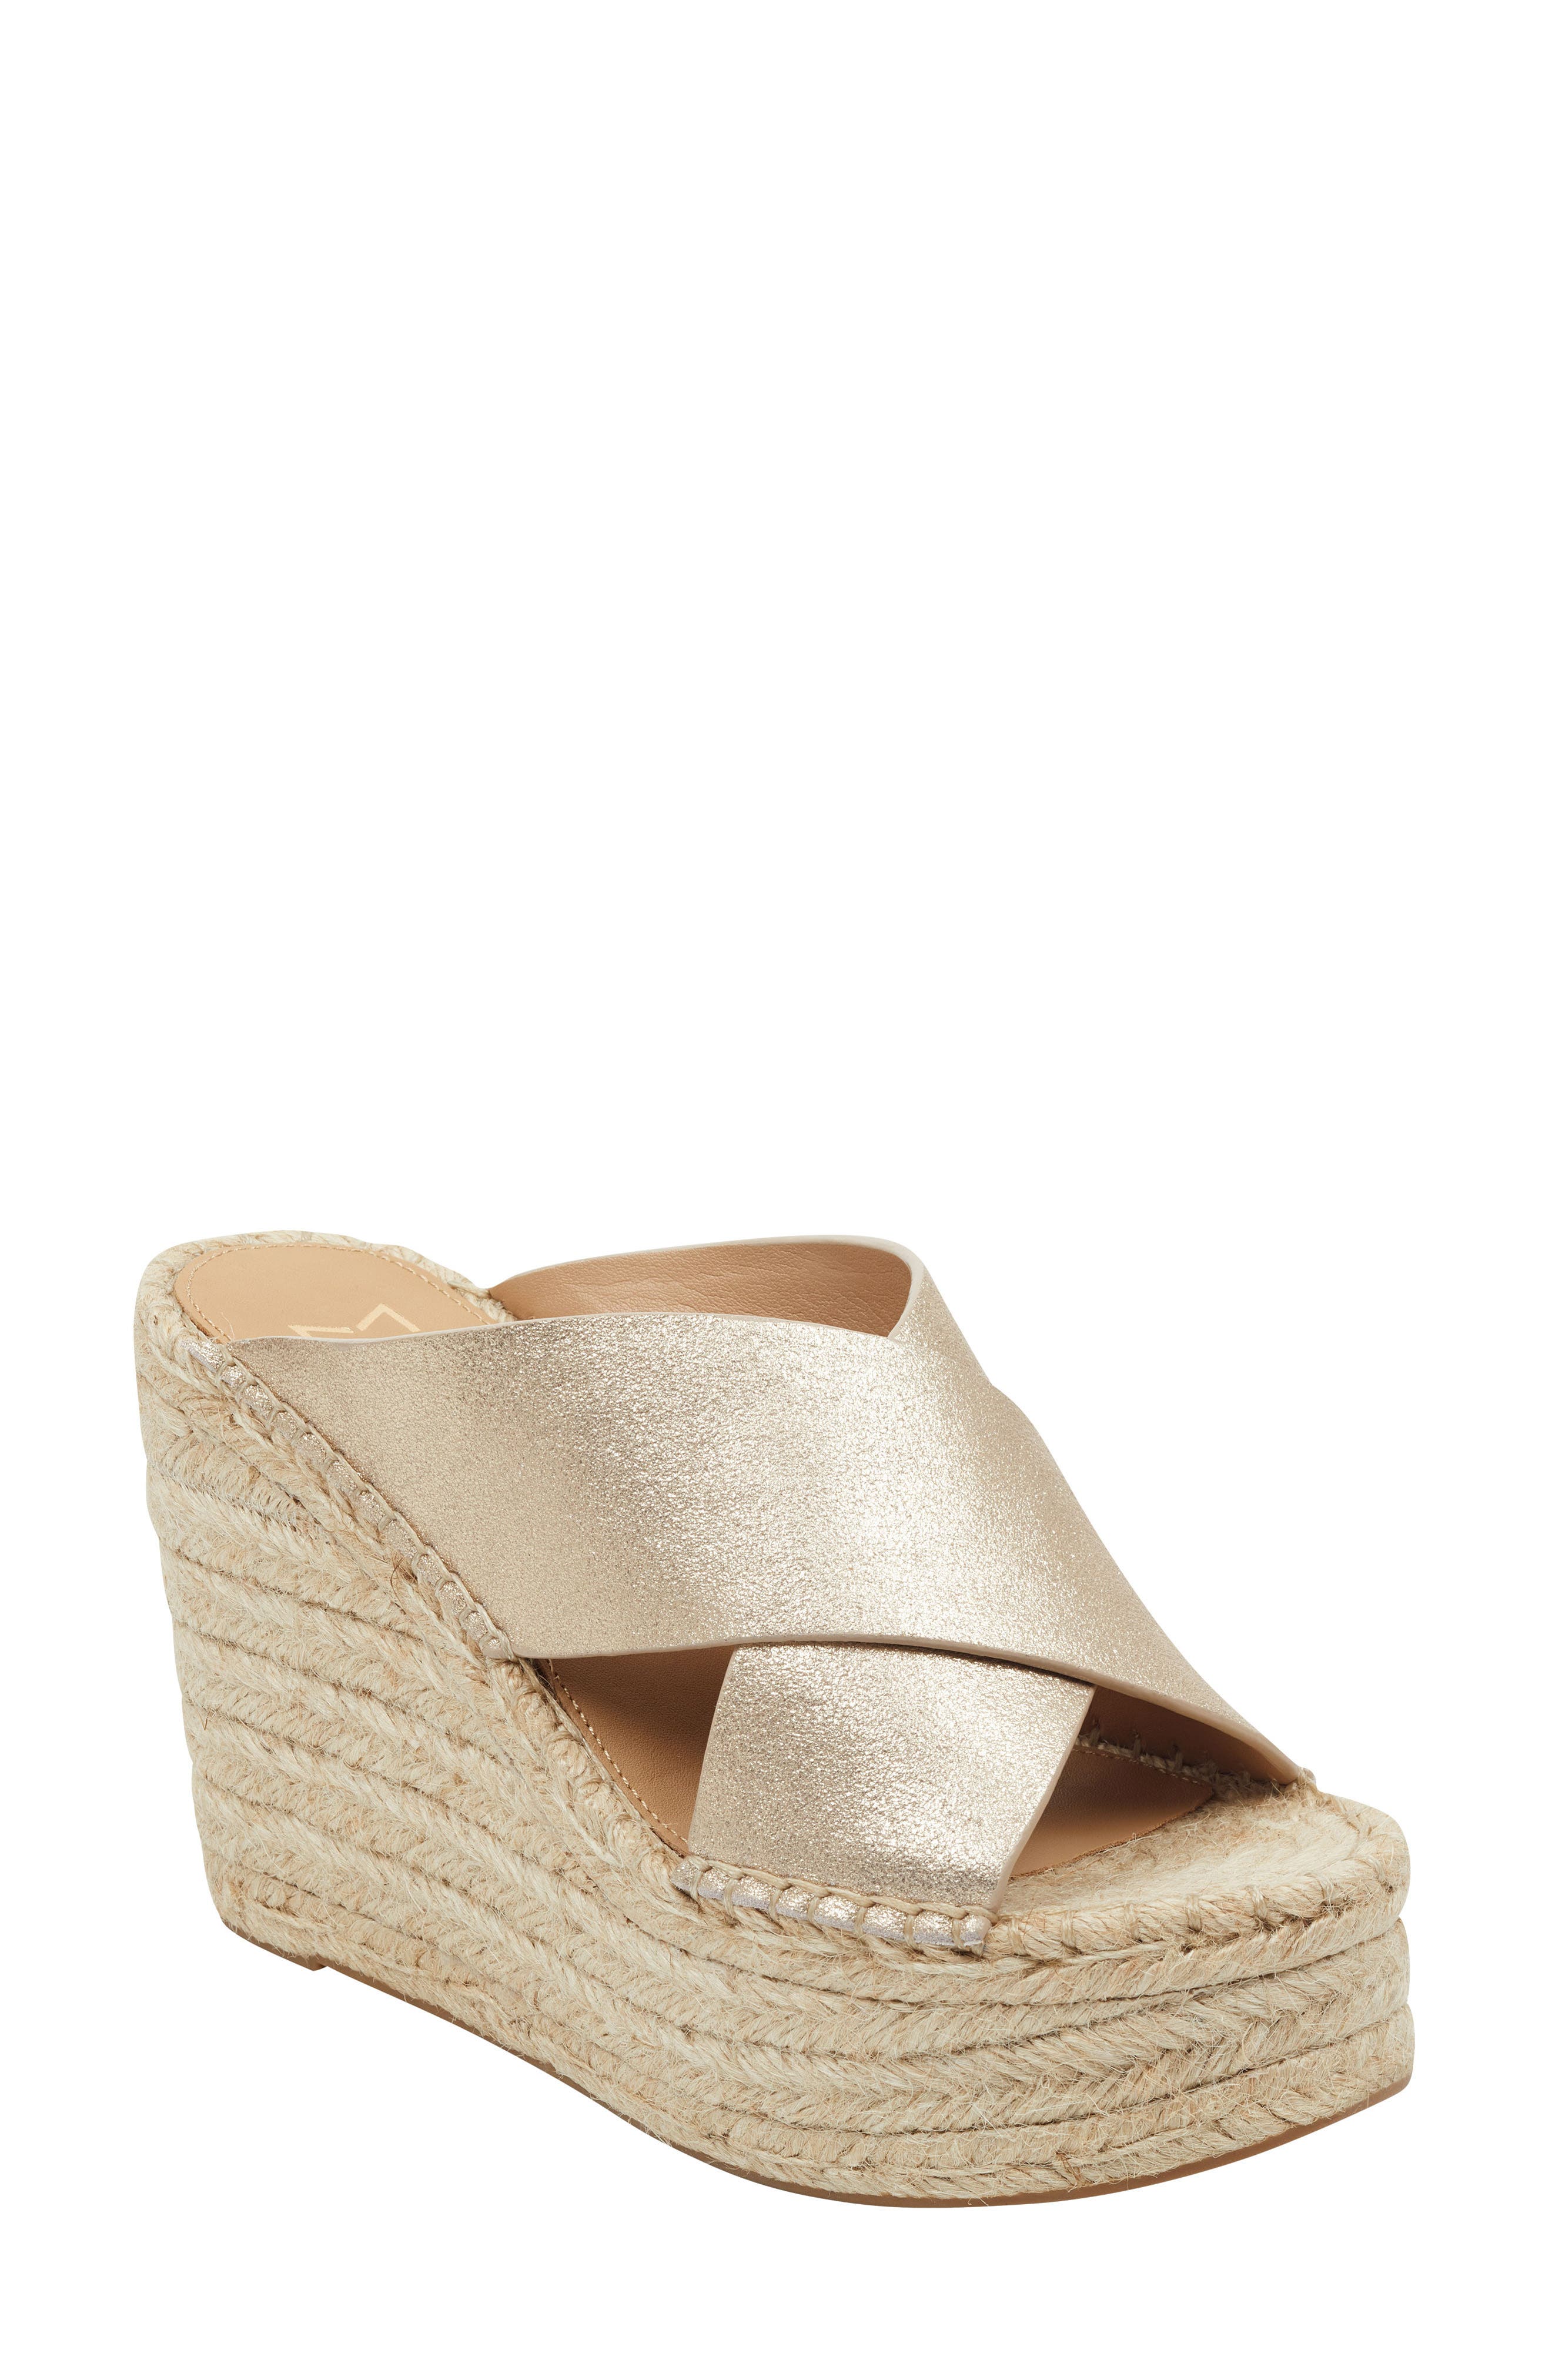 marc fisher wedges